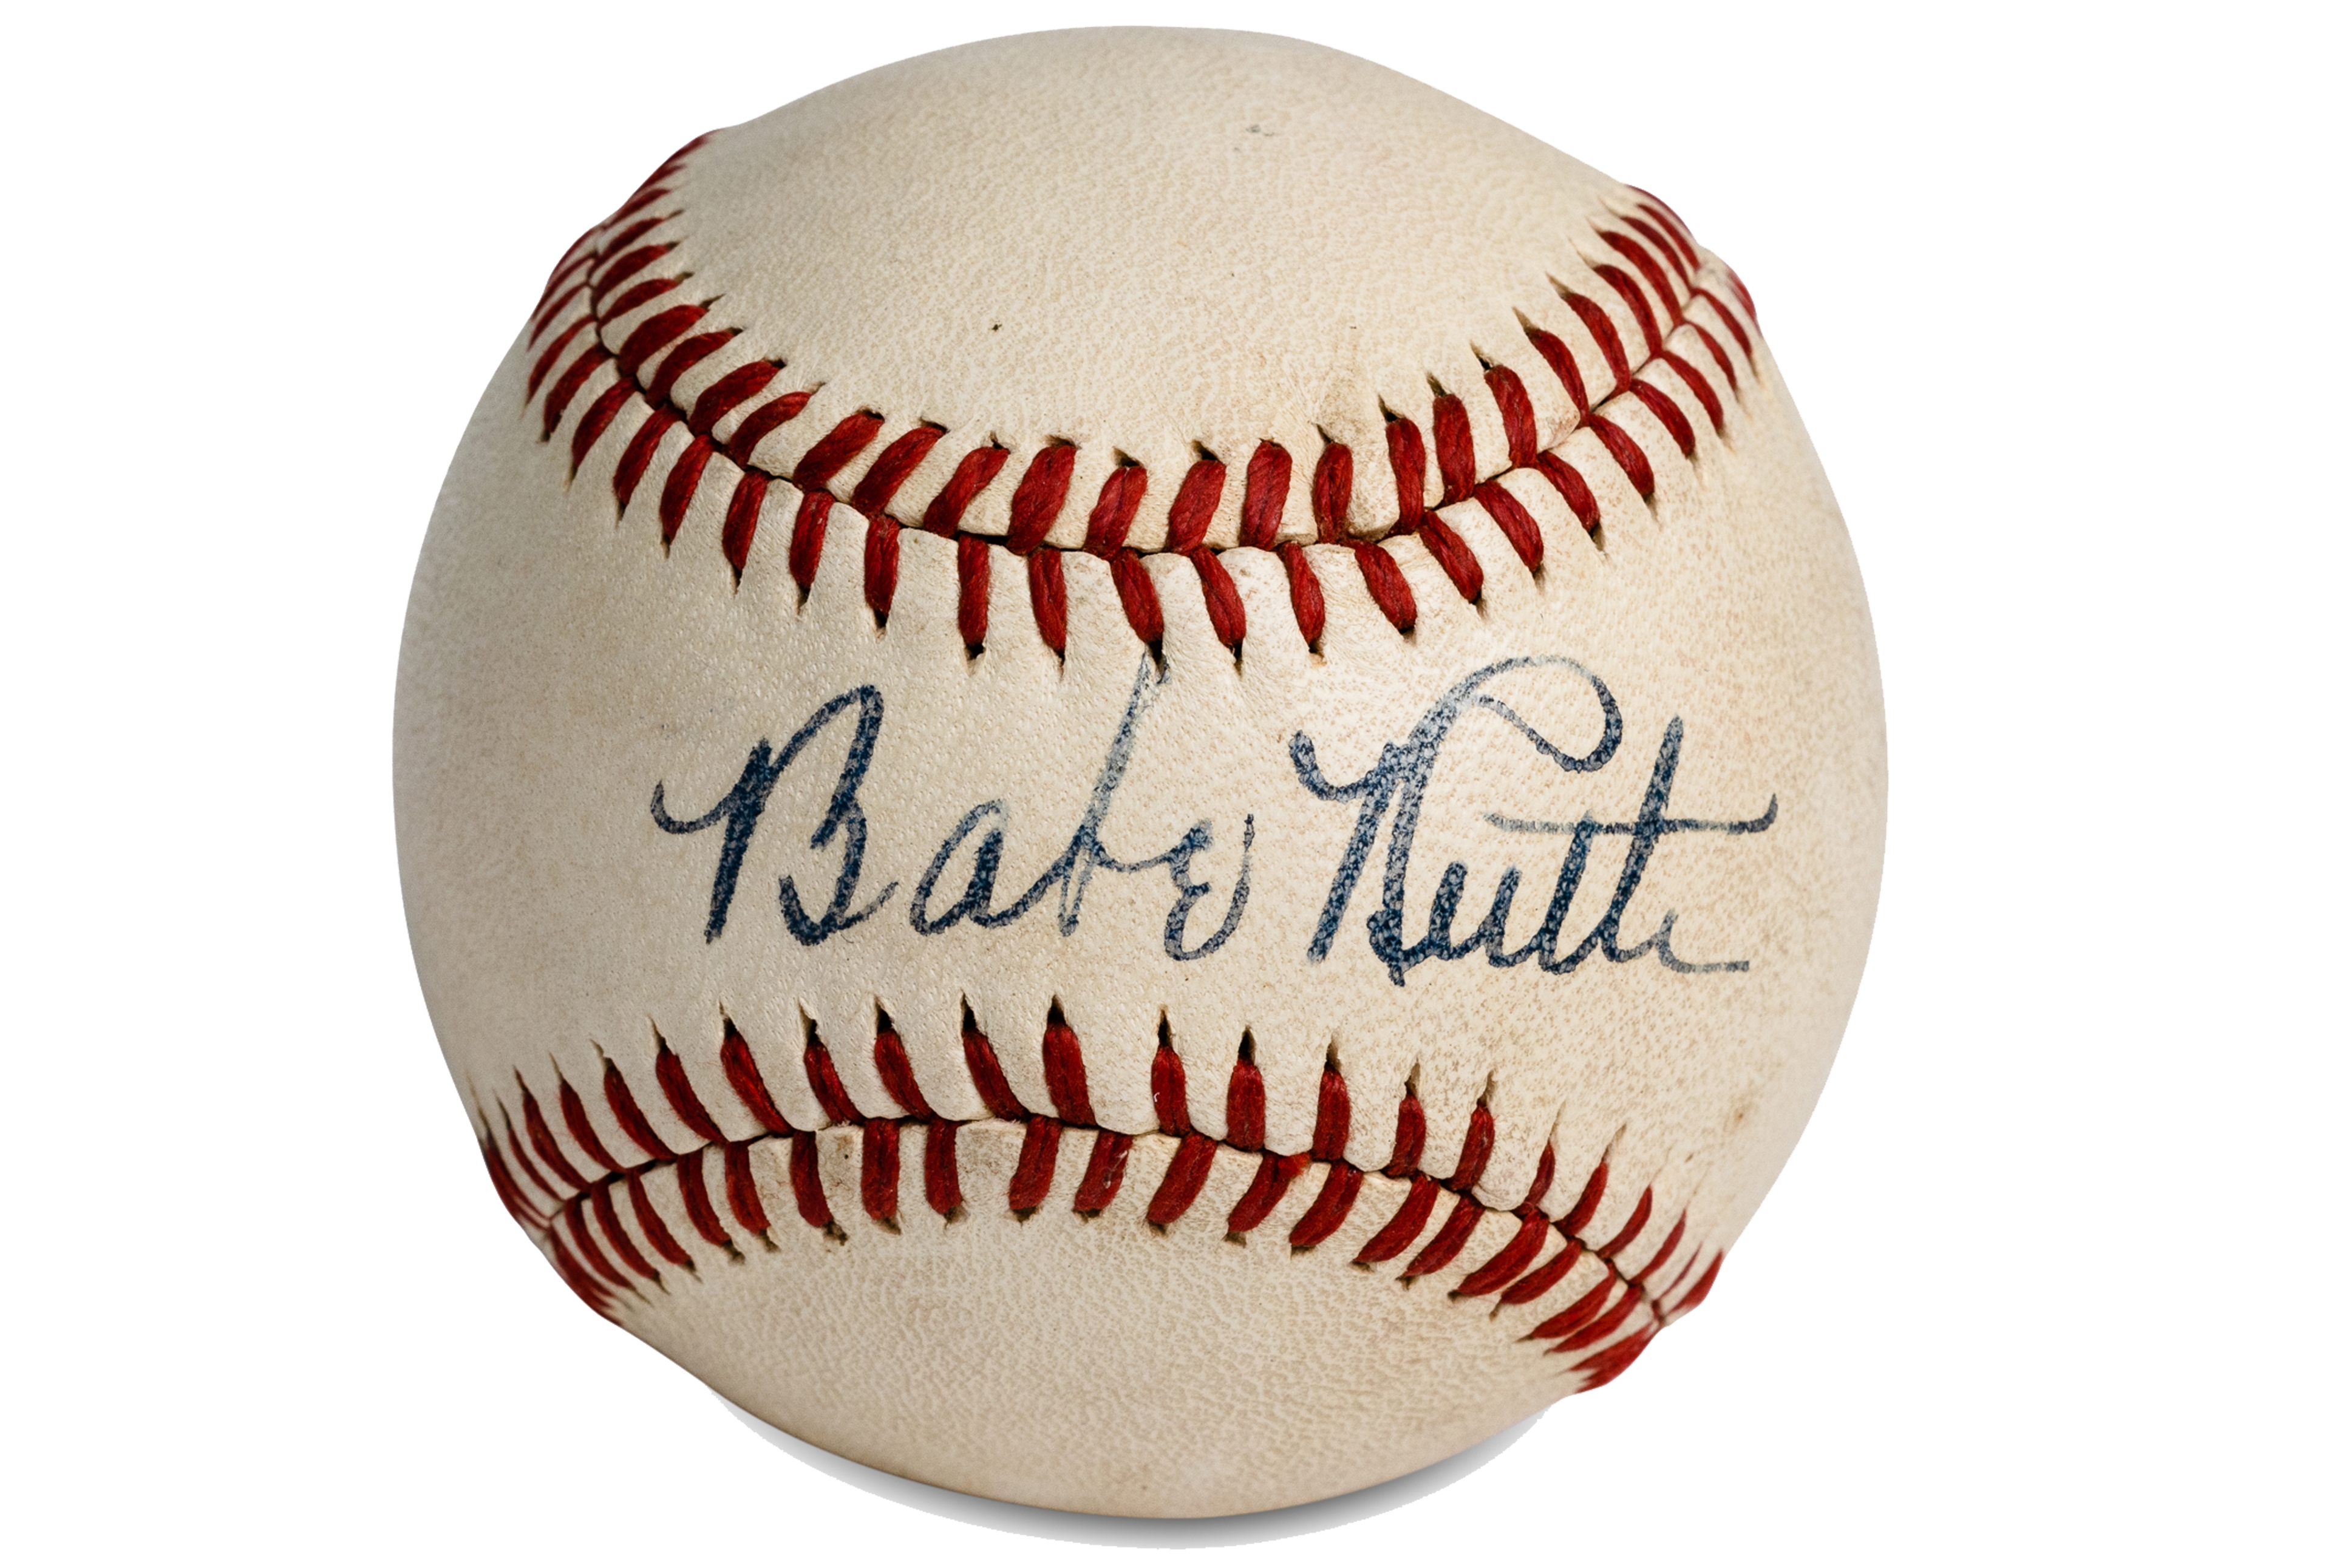 Sold at Auction: Babe Ruth signed 1940s OAL, William Harridge Ball